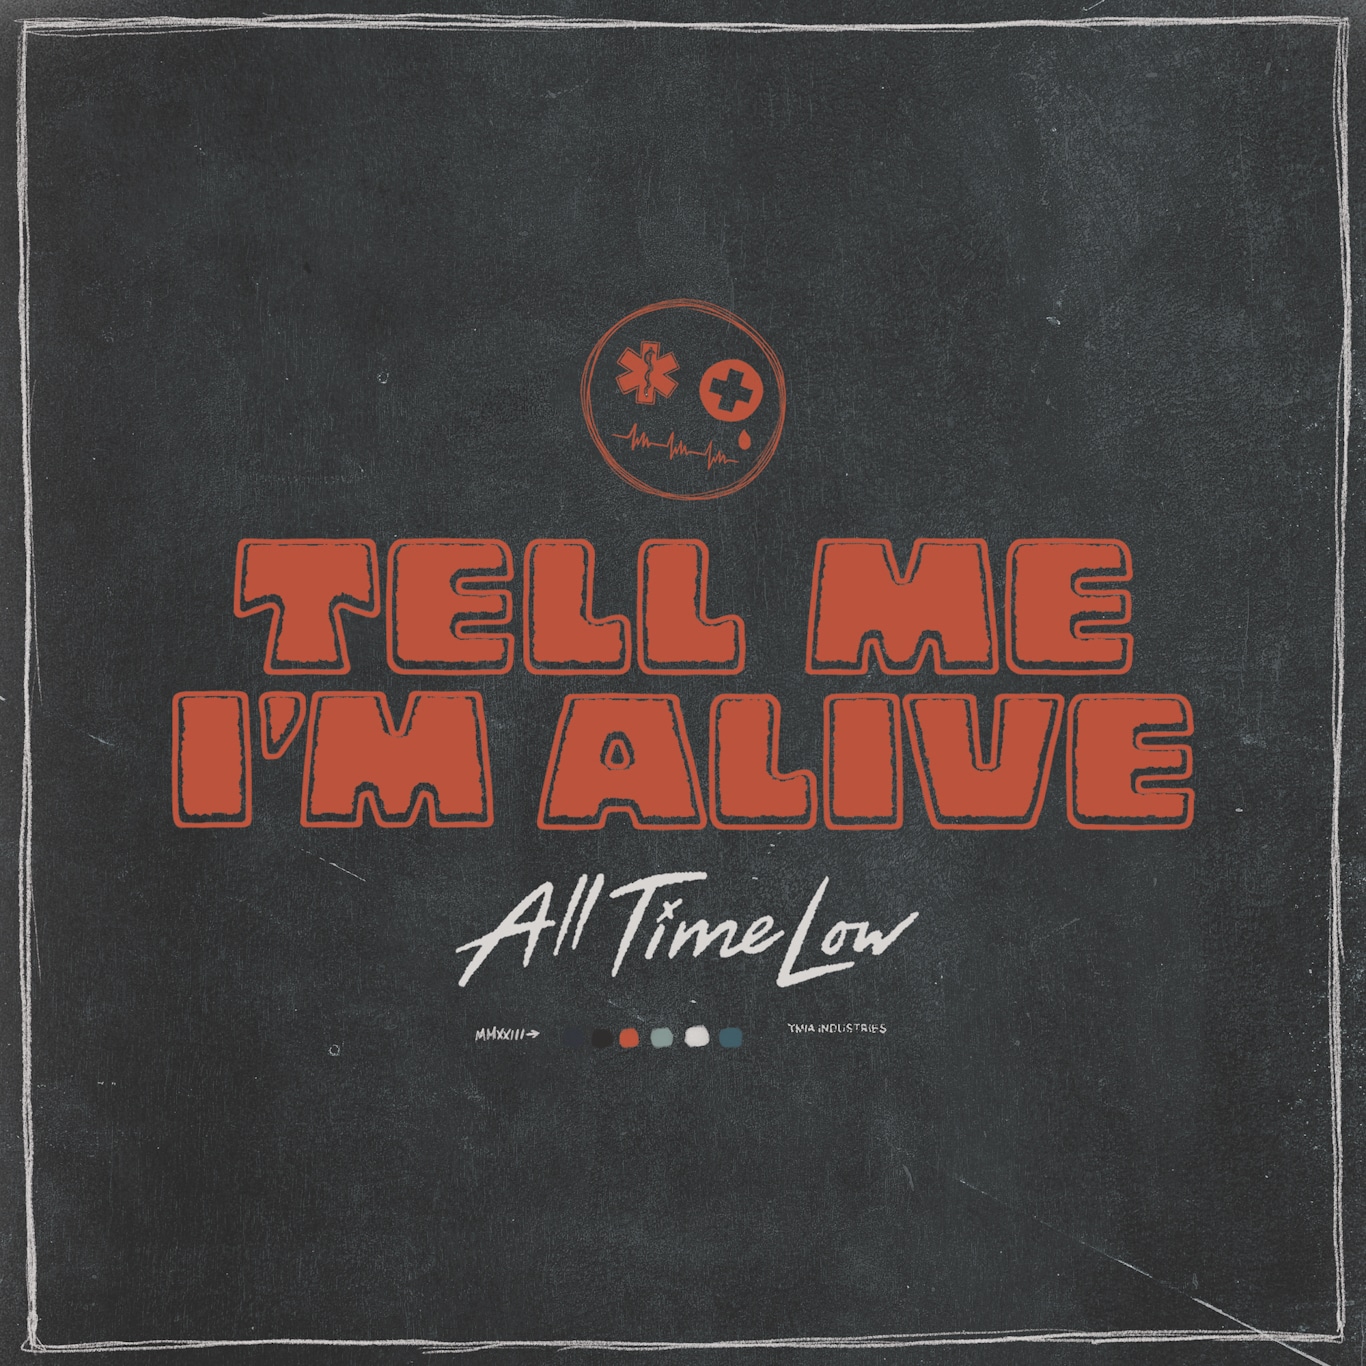 All Time Low - Tell Me I'm Alive